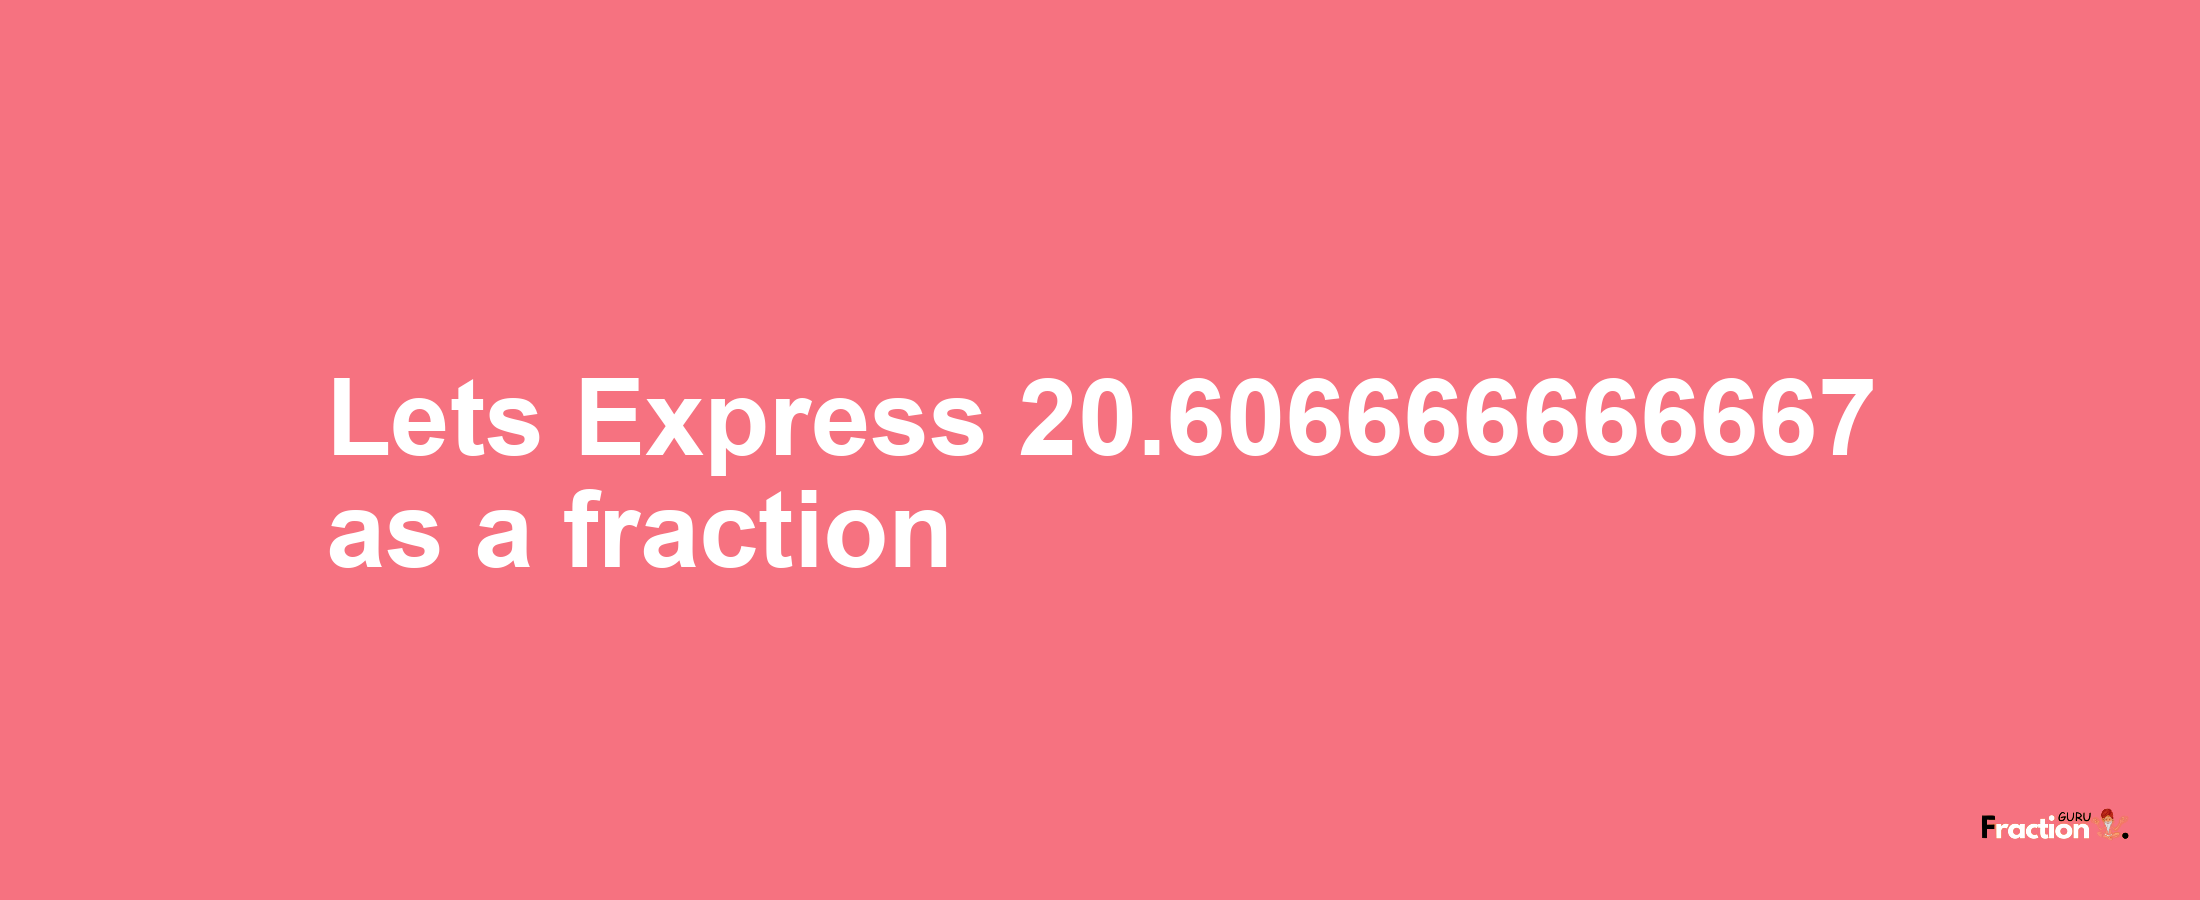 Lets Express 20.606666666667 as afraction